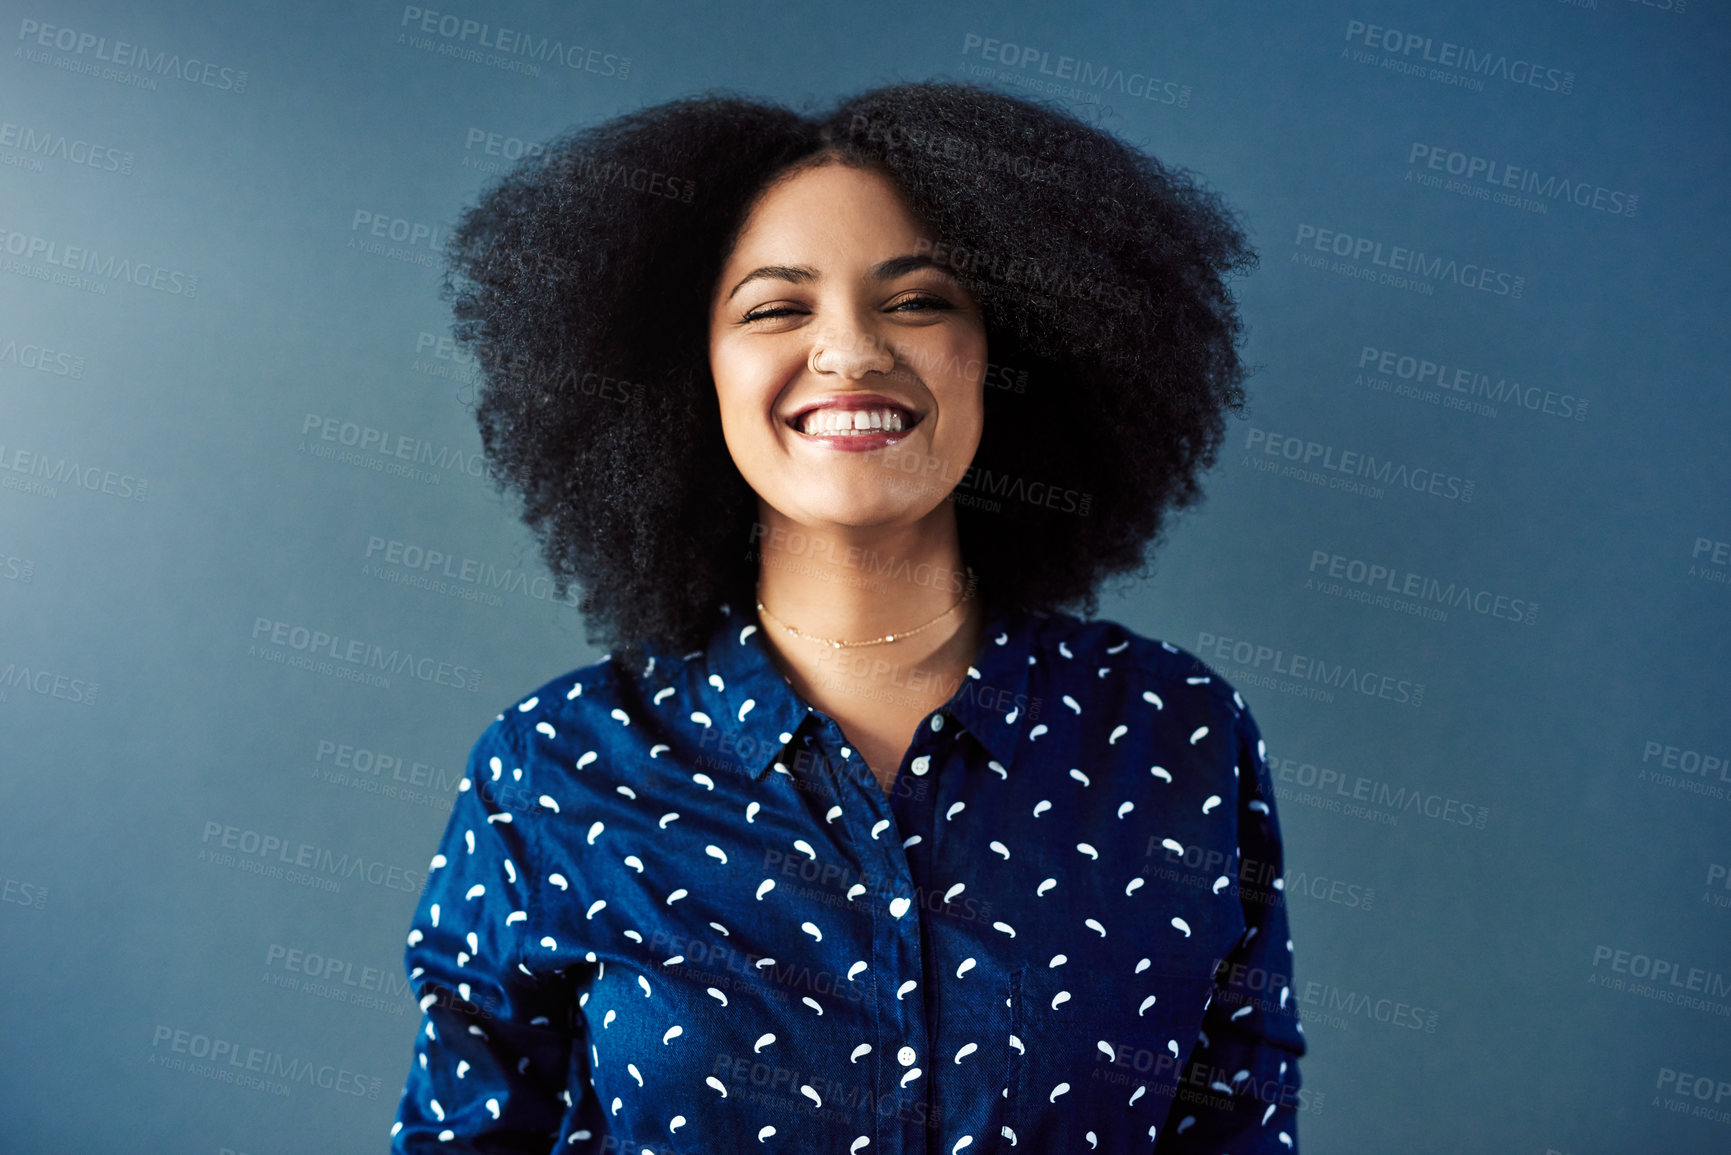 Buy stock photo Studio portrait of an attractive young woman against a blue background